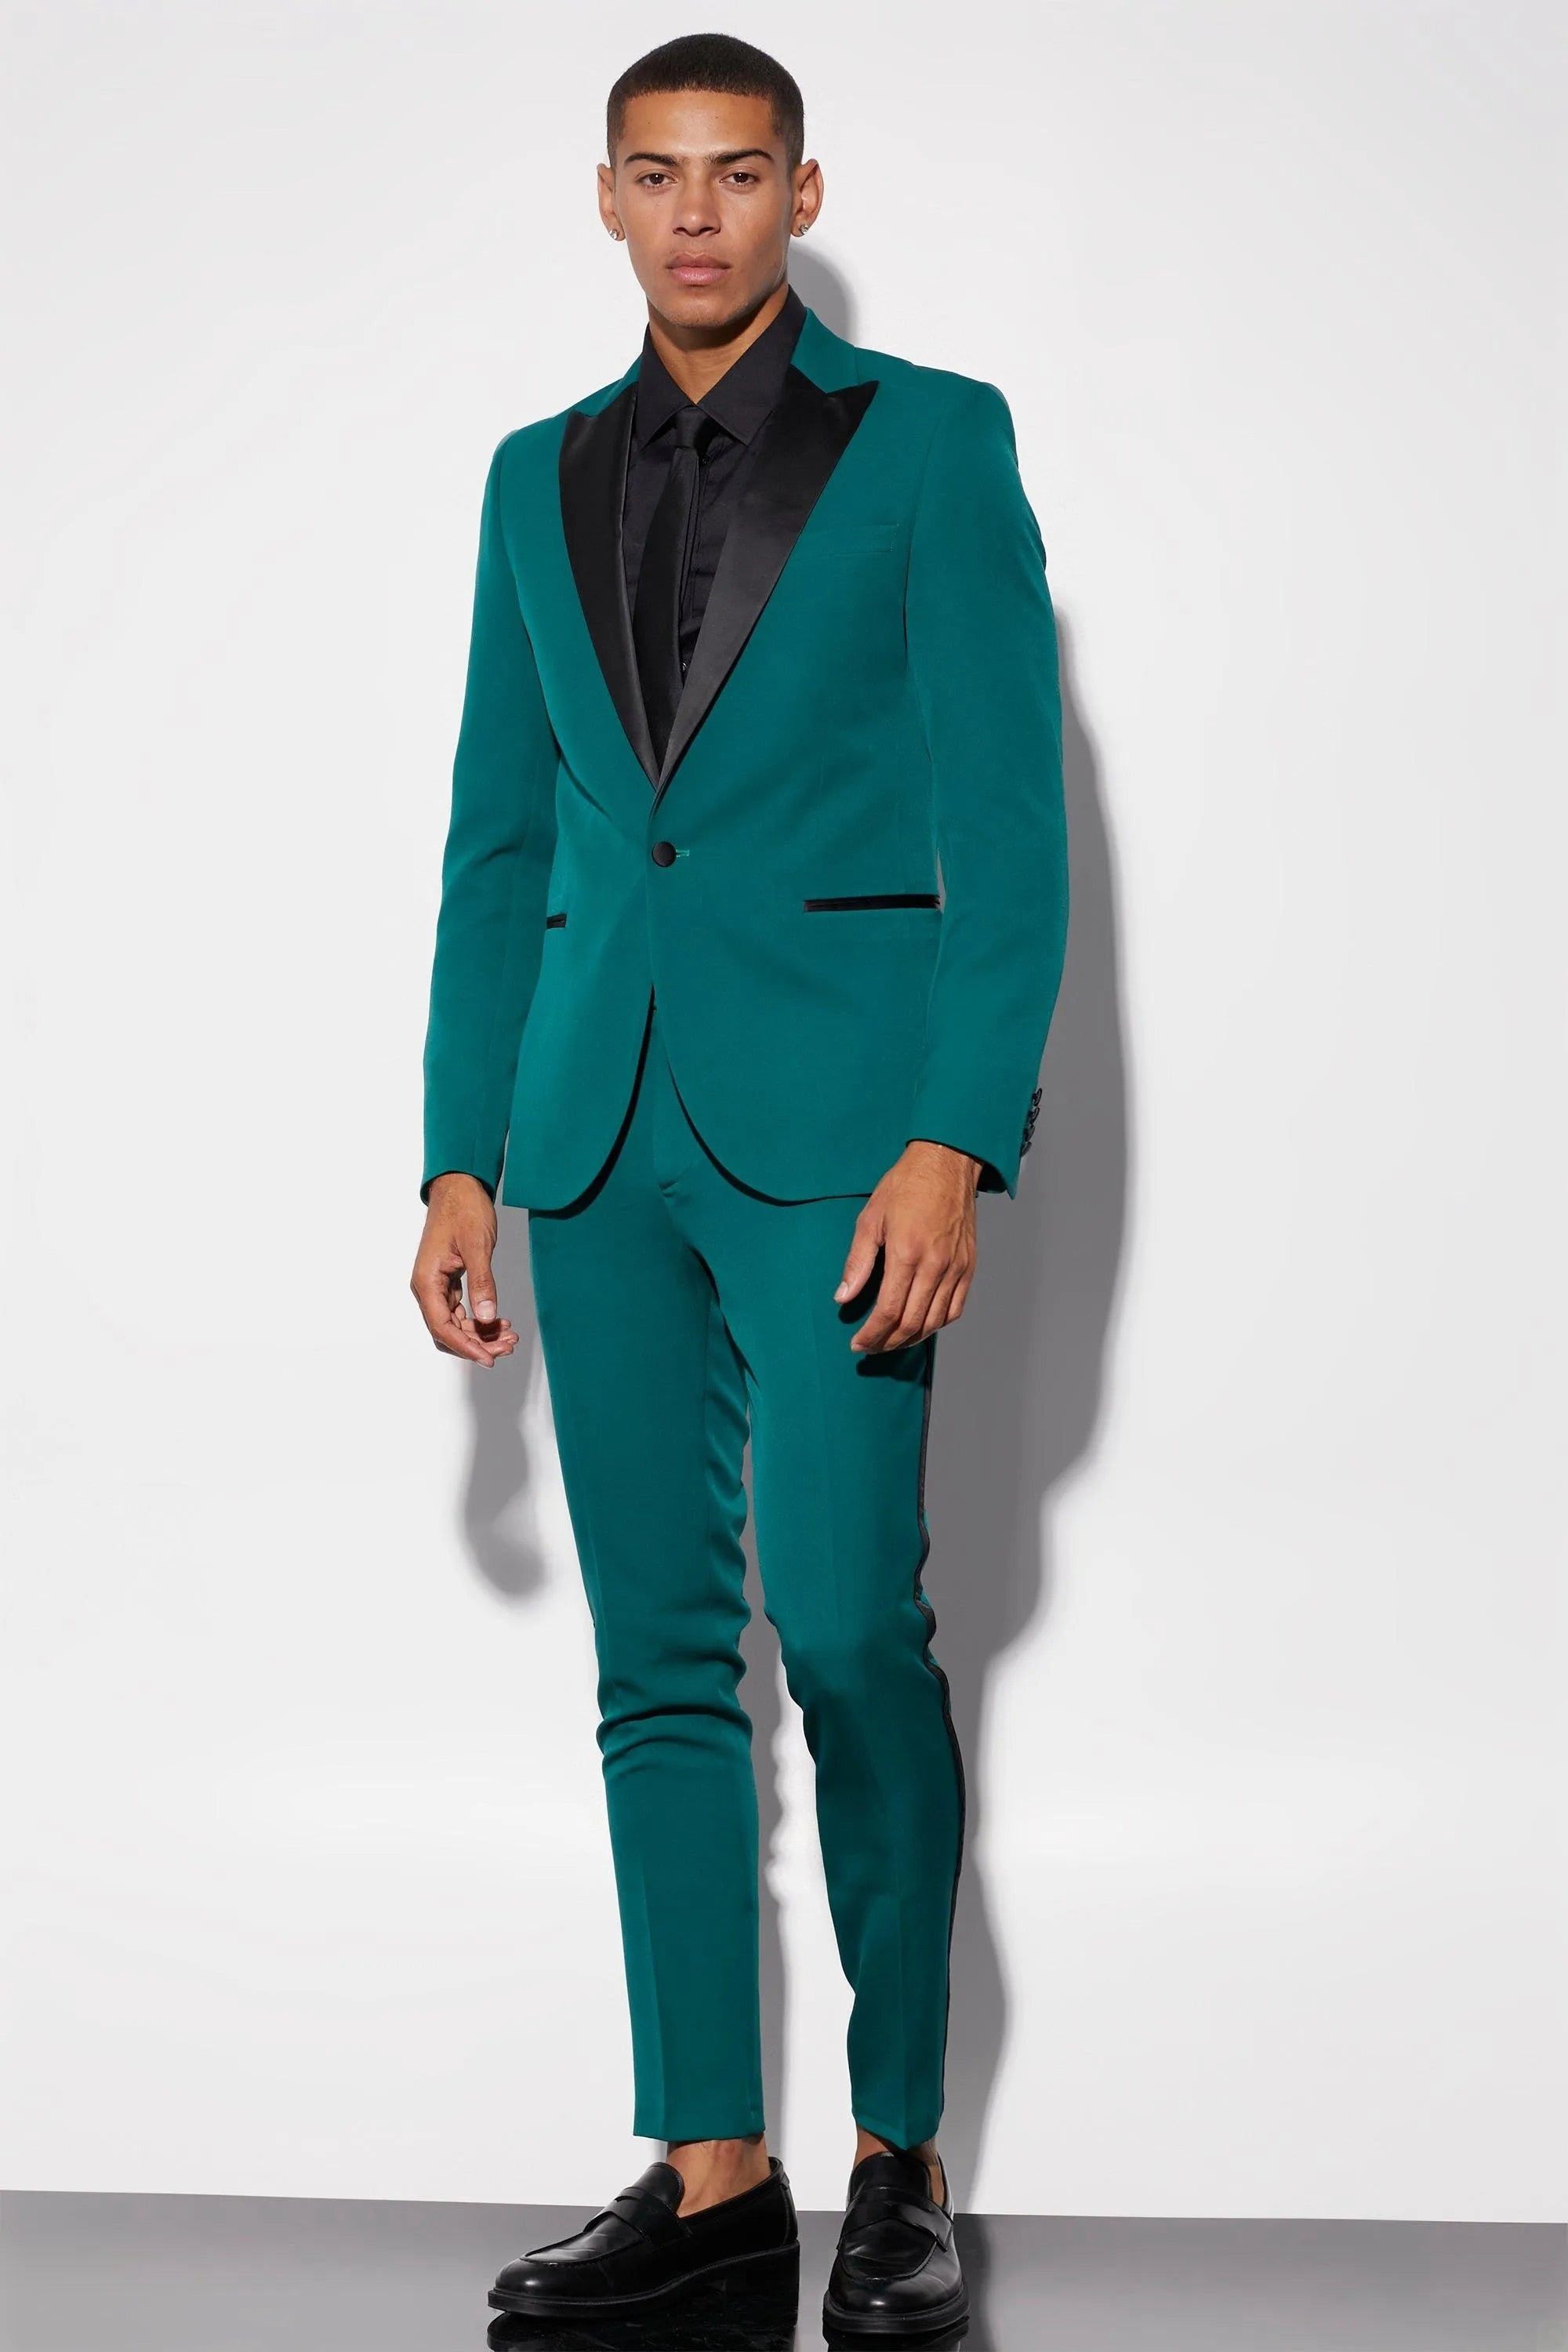 Men's Green Suits Groom Wedding Tuxedos Peak Lapel Formal Prom Suits Set 2 Pieces Jacket and Pant